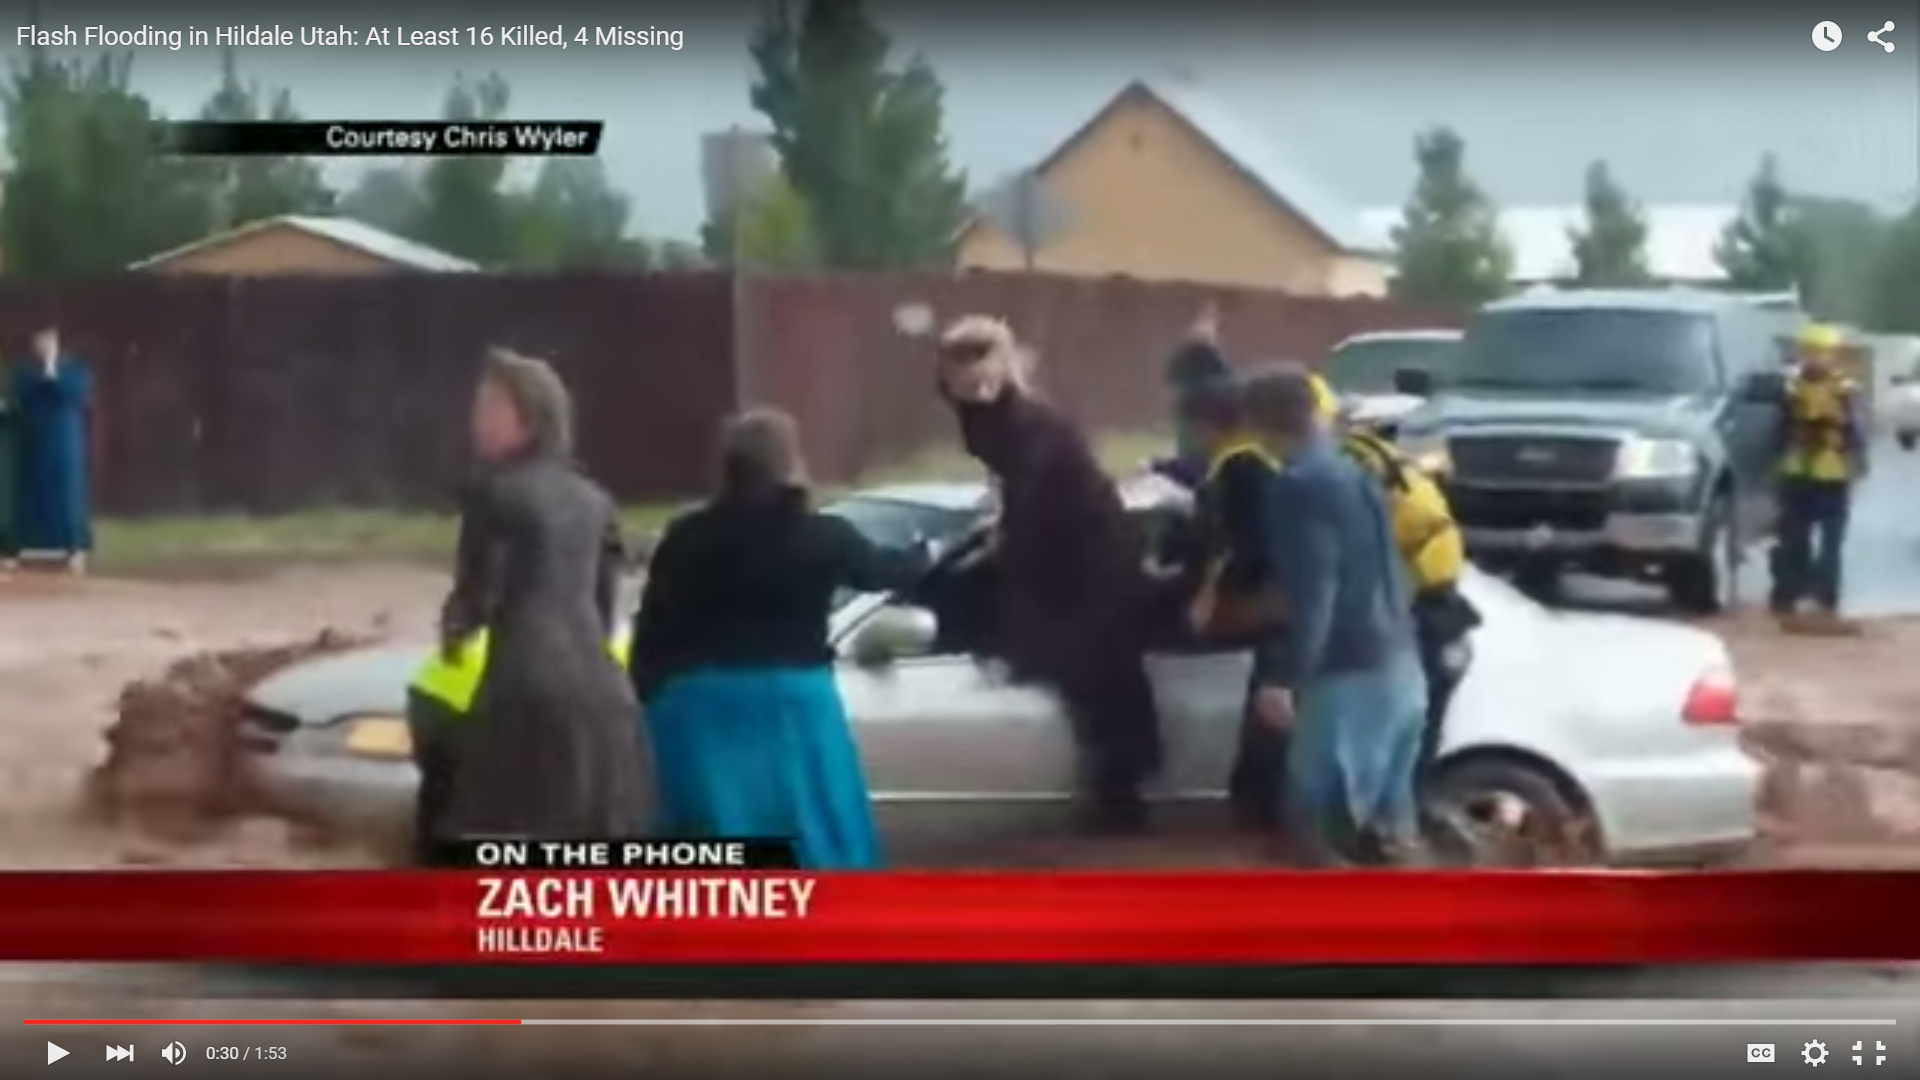 A screen capture of a video showing people being pulled from a trapped car in a flooded roadway in Hildale, Utah.